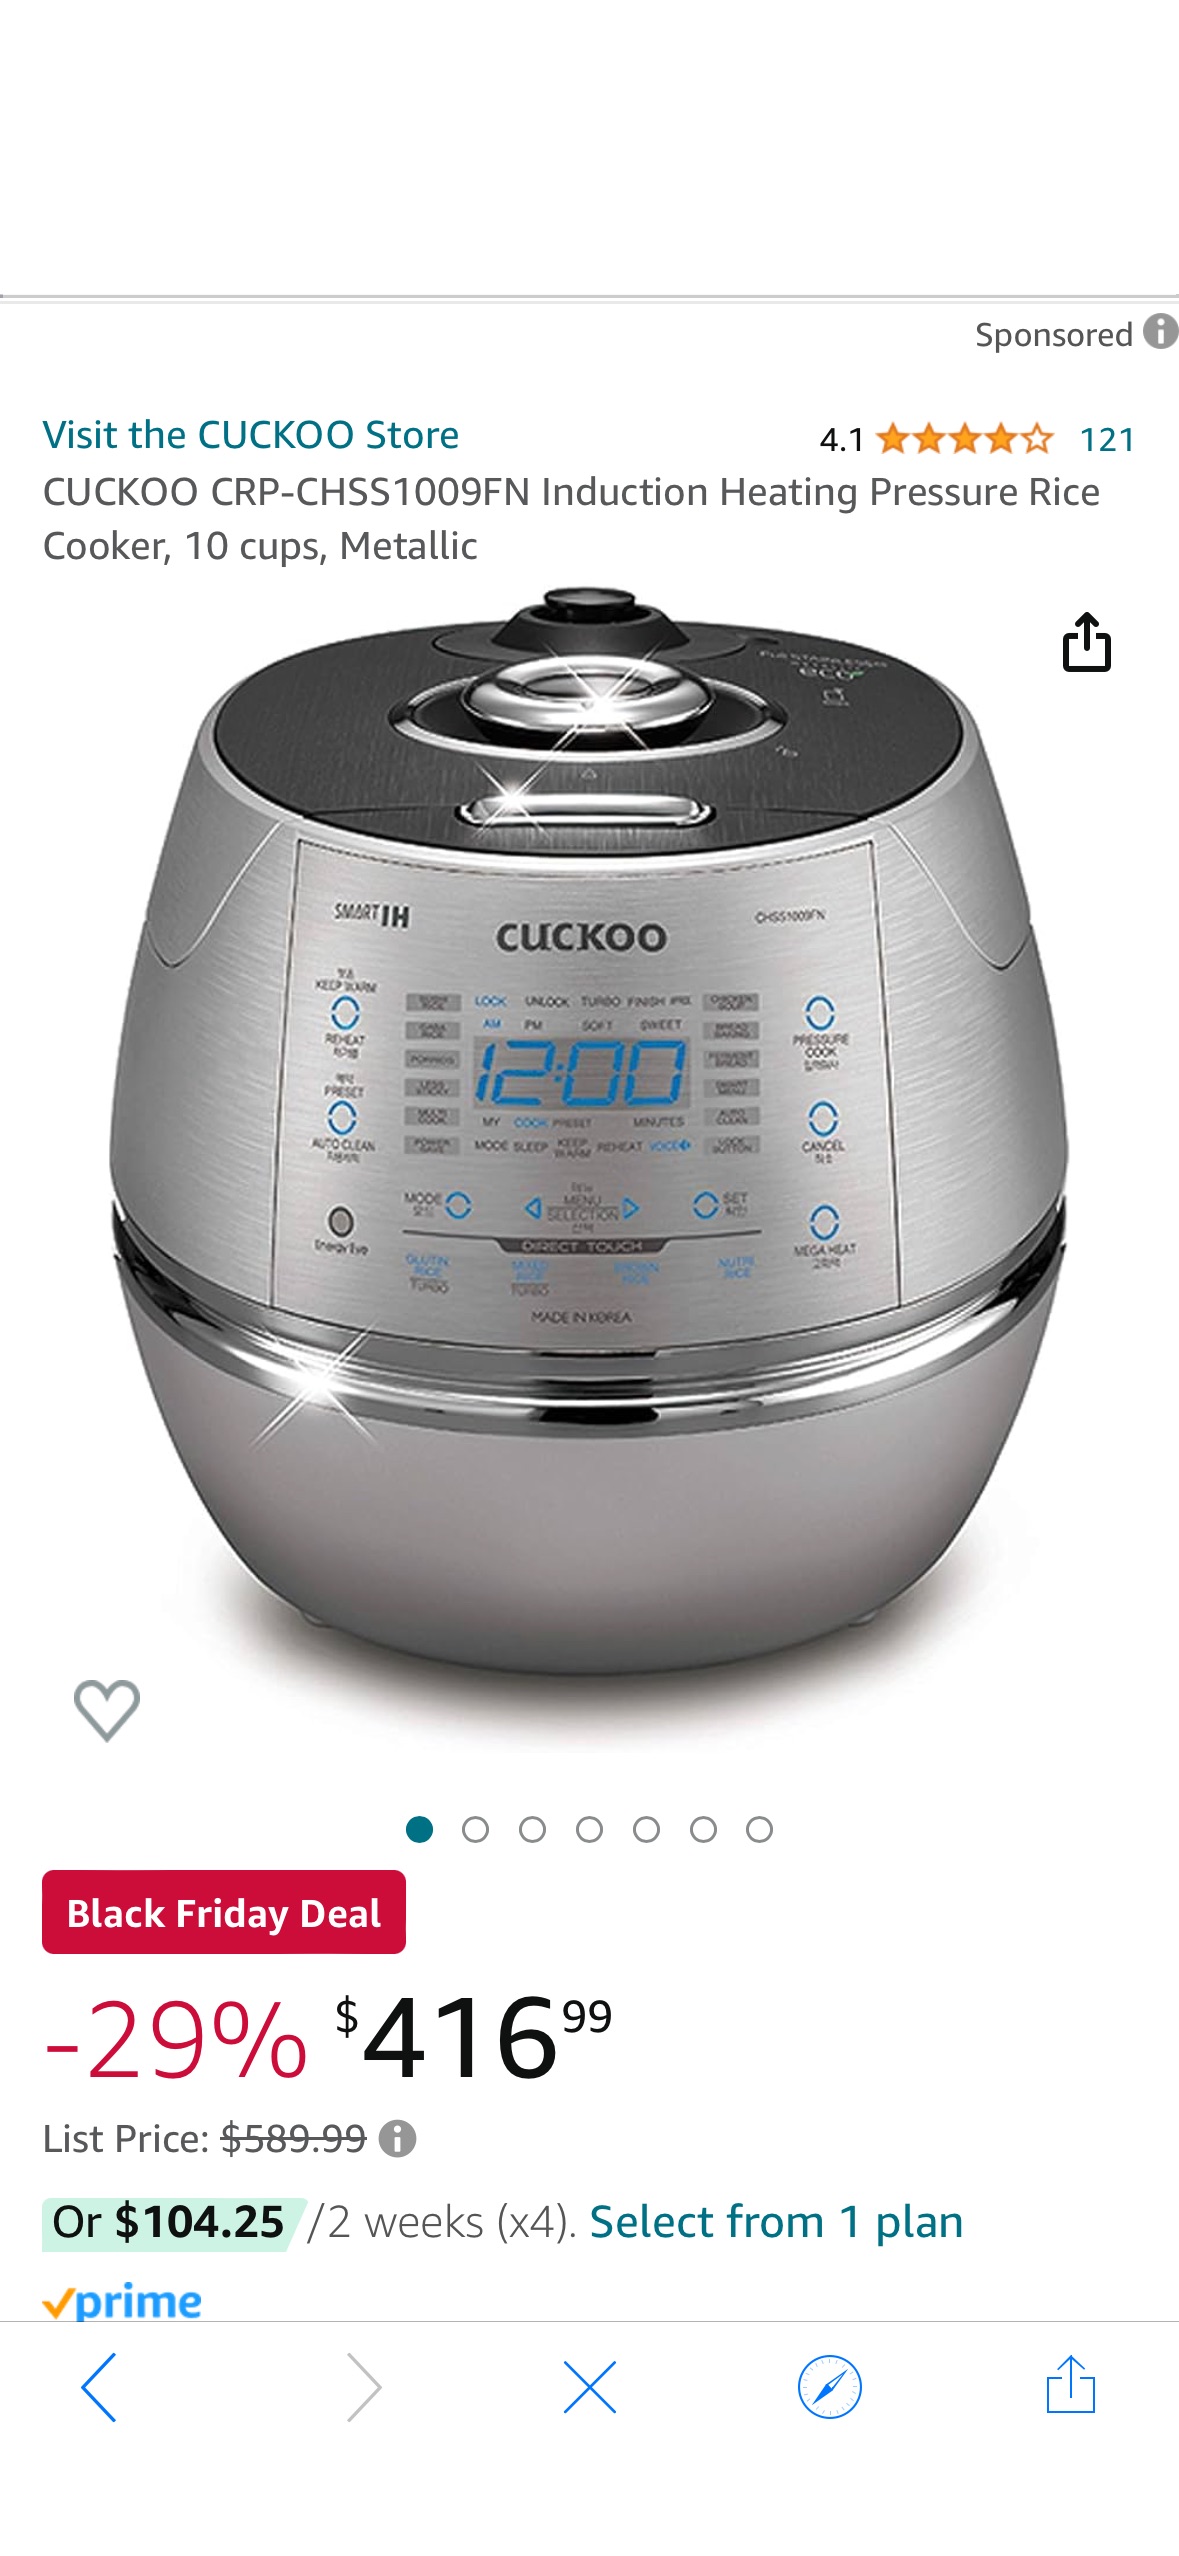 Amazon.com: CUCKOO CRP-CHSS1009FN Induction Heating Pressure Rice Cooker, 10 cups, Metallic: Home & Kitchen